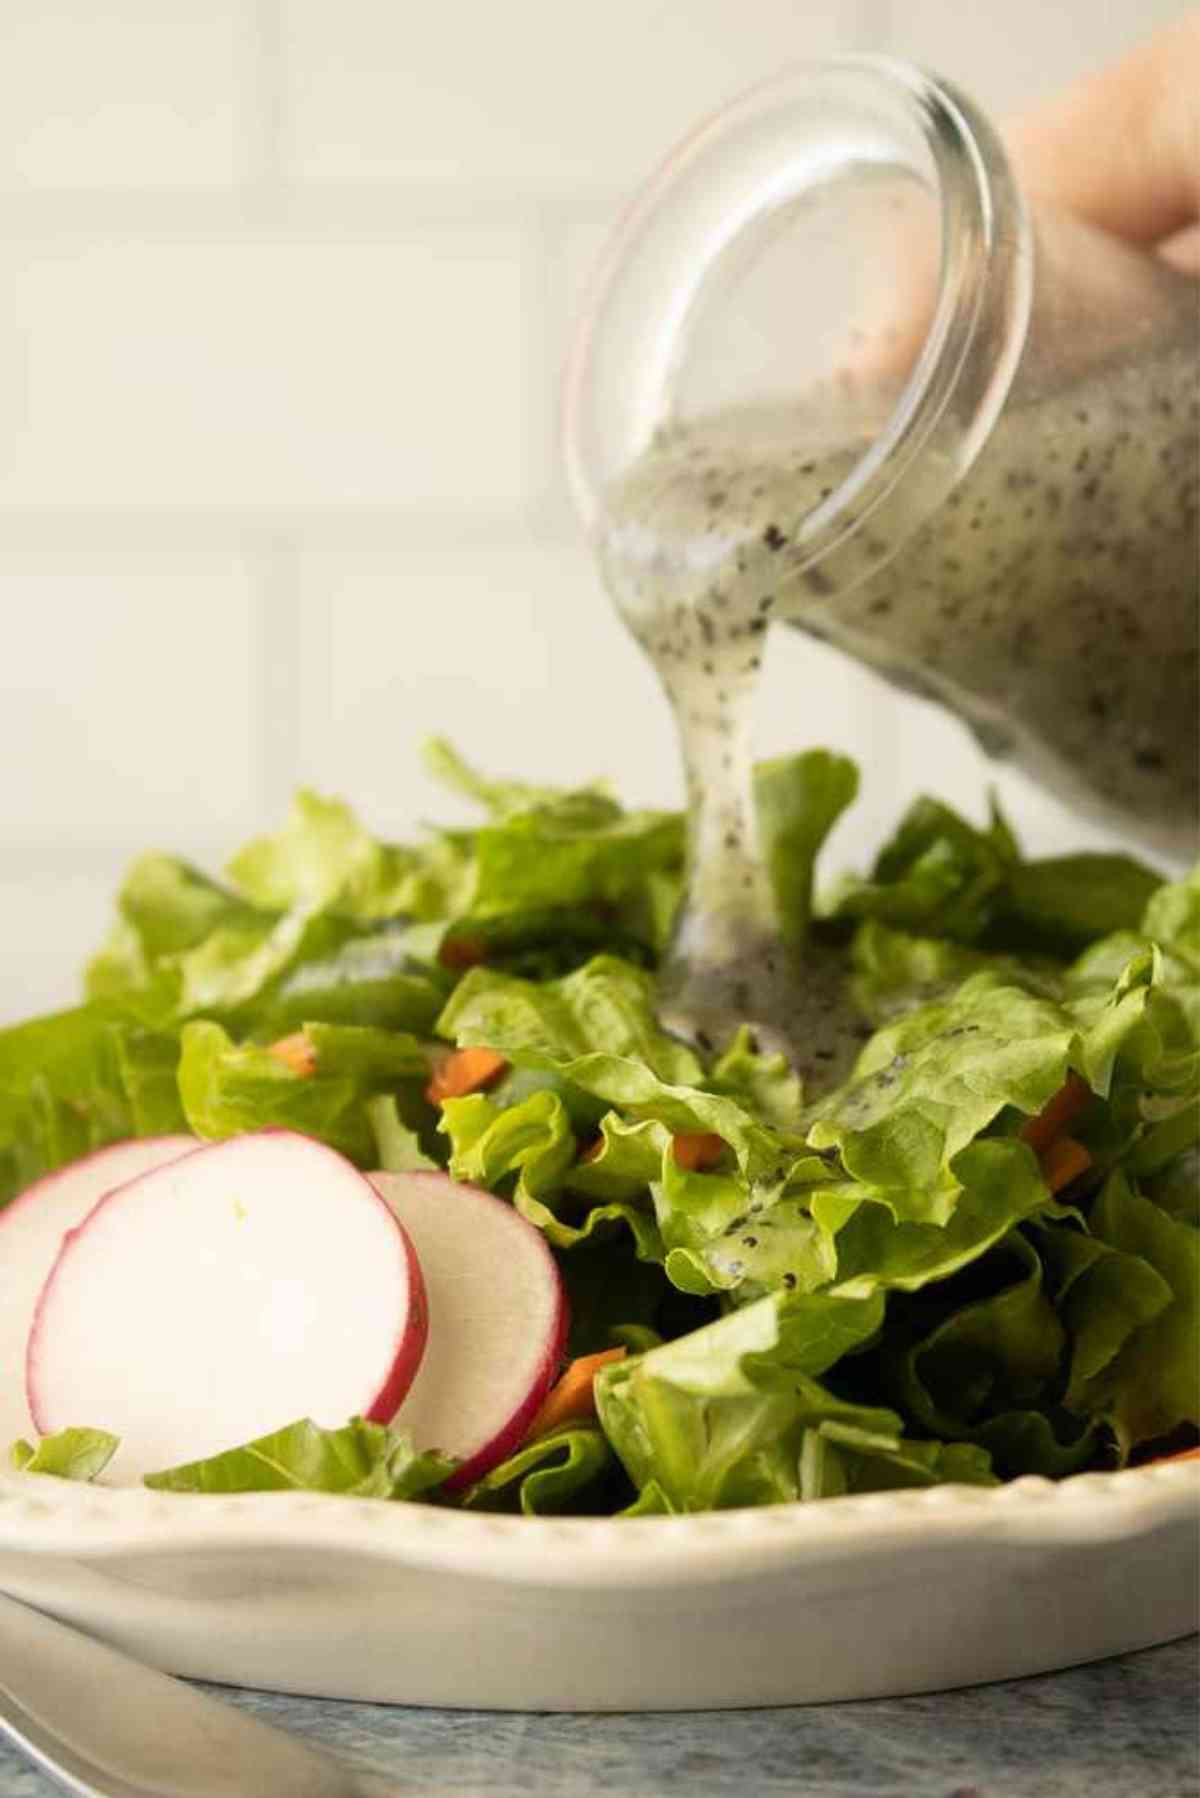 Poppy seed dressing being drizzled over a fresh green salad.